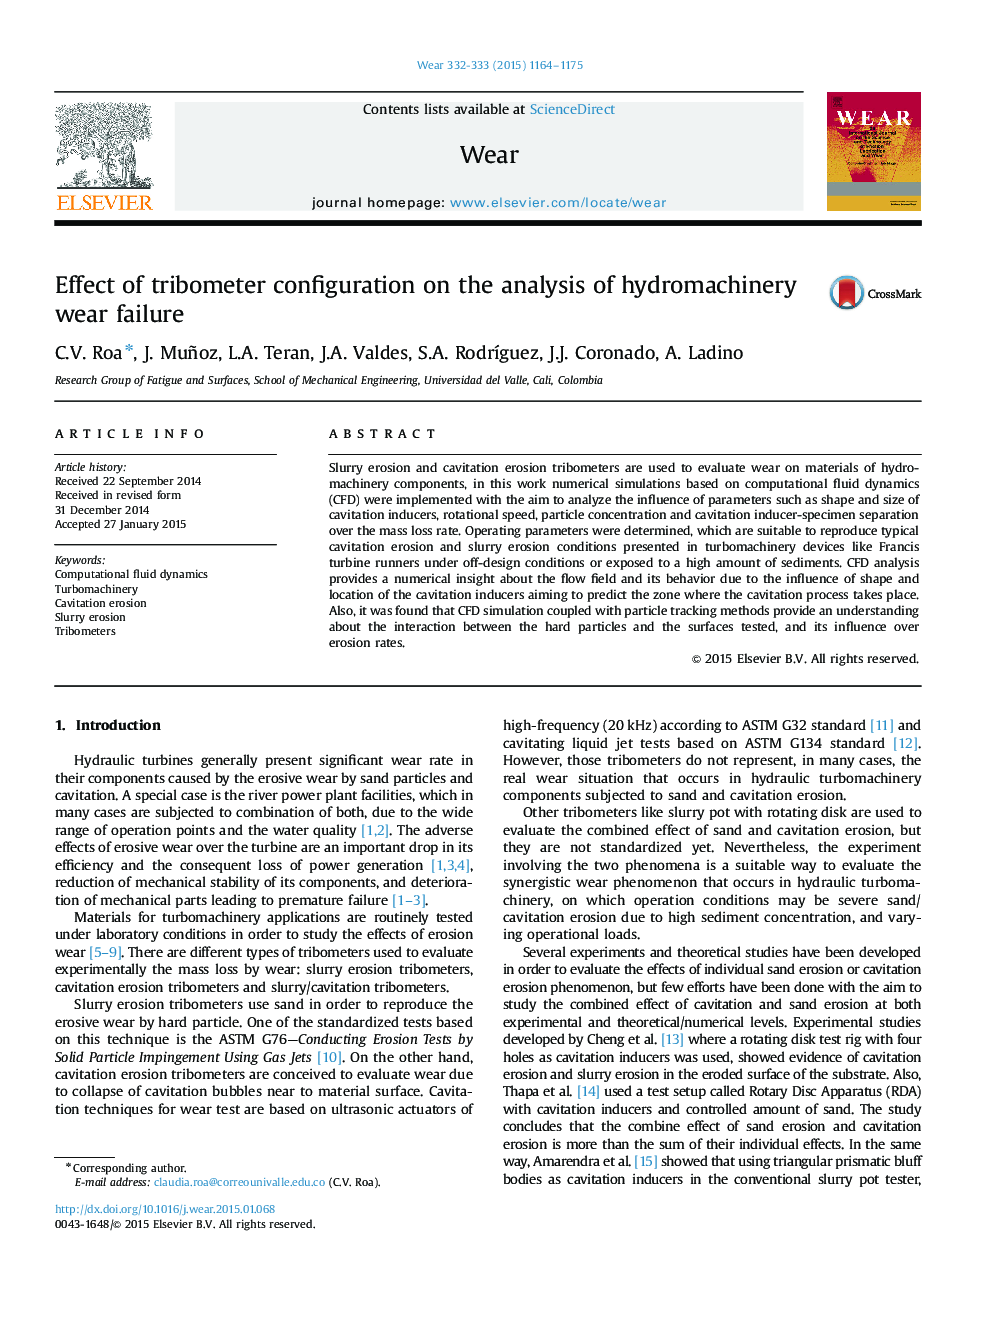 Effect of tribometer configuration on the analysis of hydromachinery wear failure